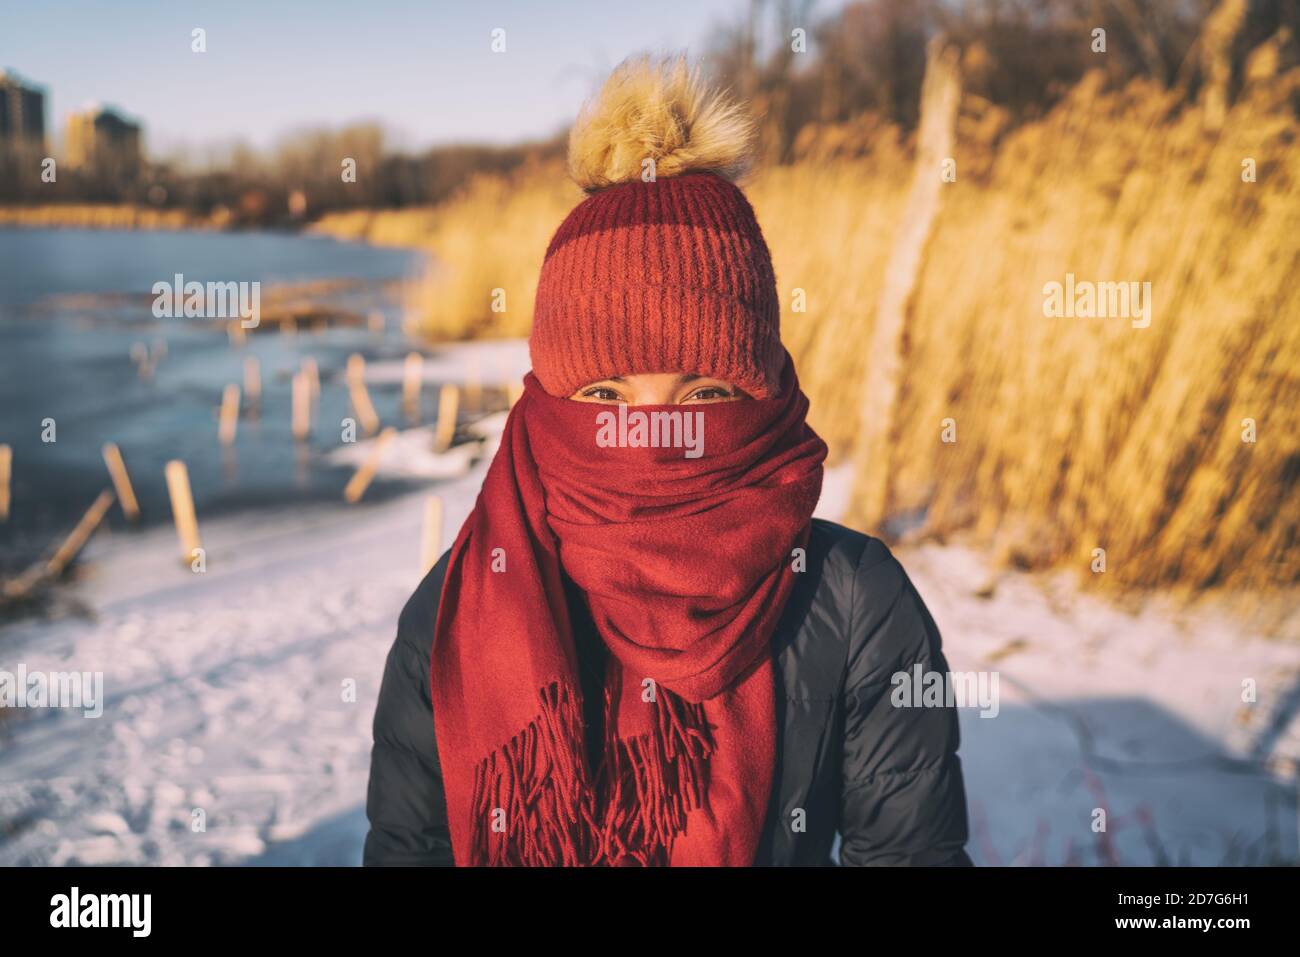 Winter cold weather protection girl with face and head completely covered with warm scarf and beanie hat. Funny portrait outdoor portraying intense Stock Photo